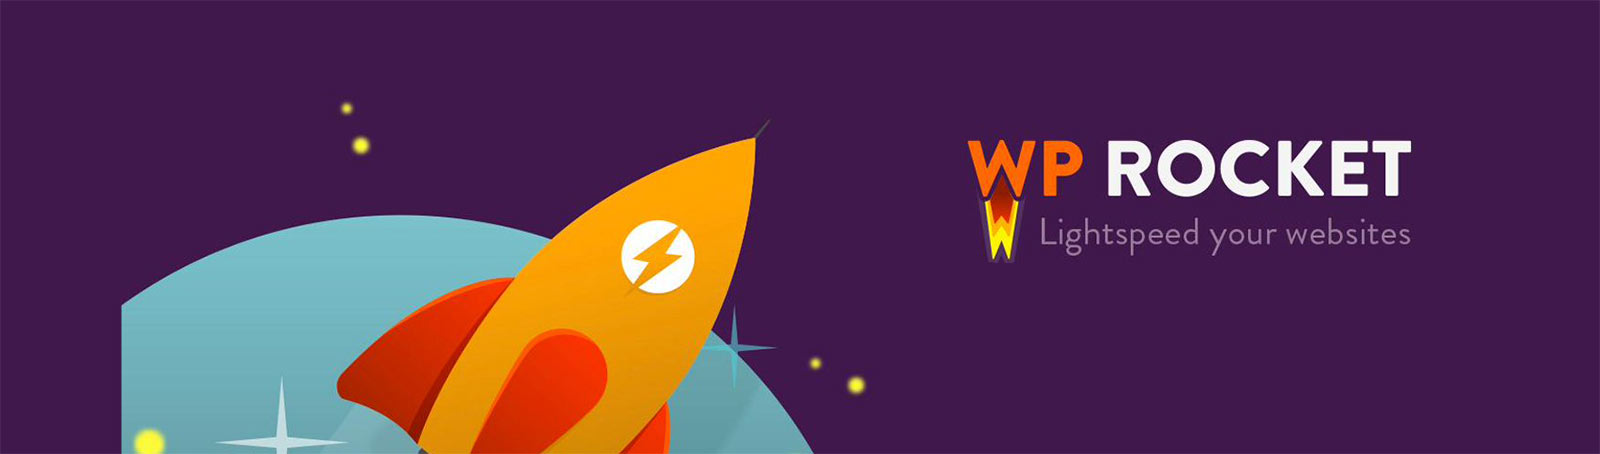 wp rocket json query strings